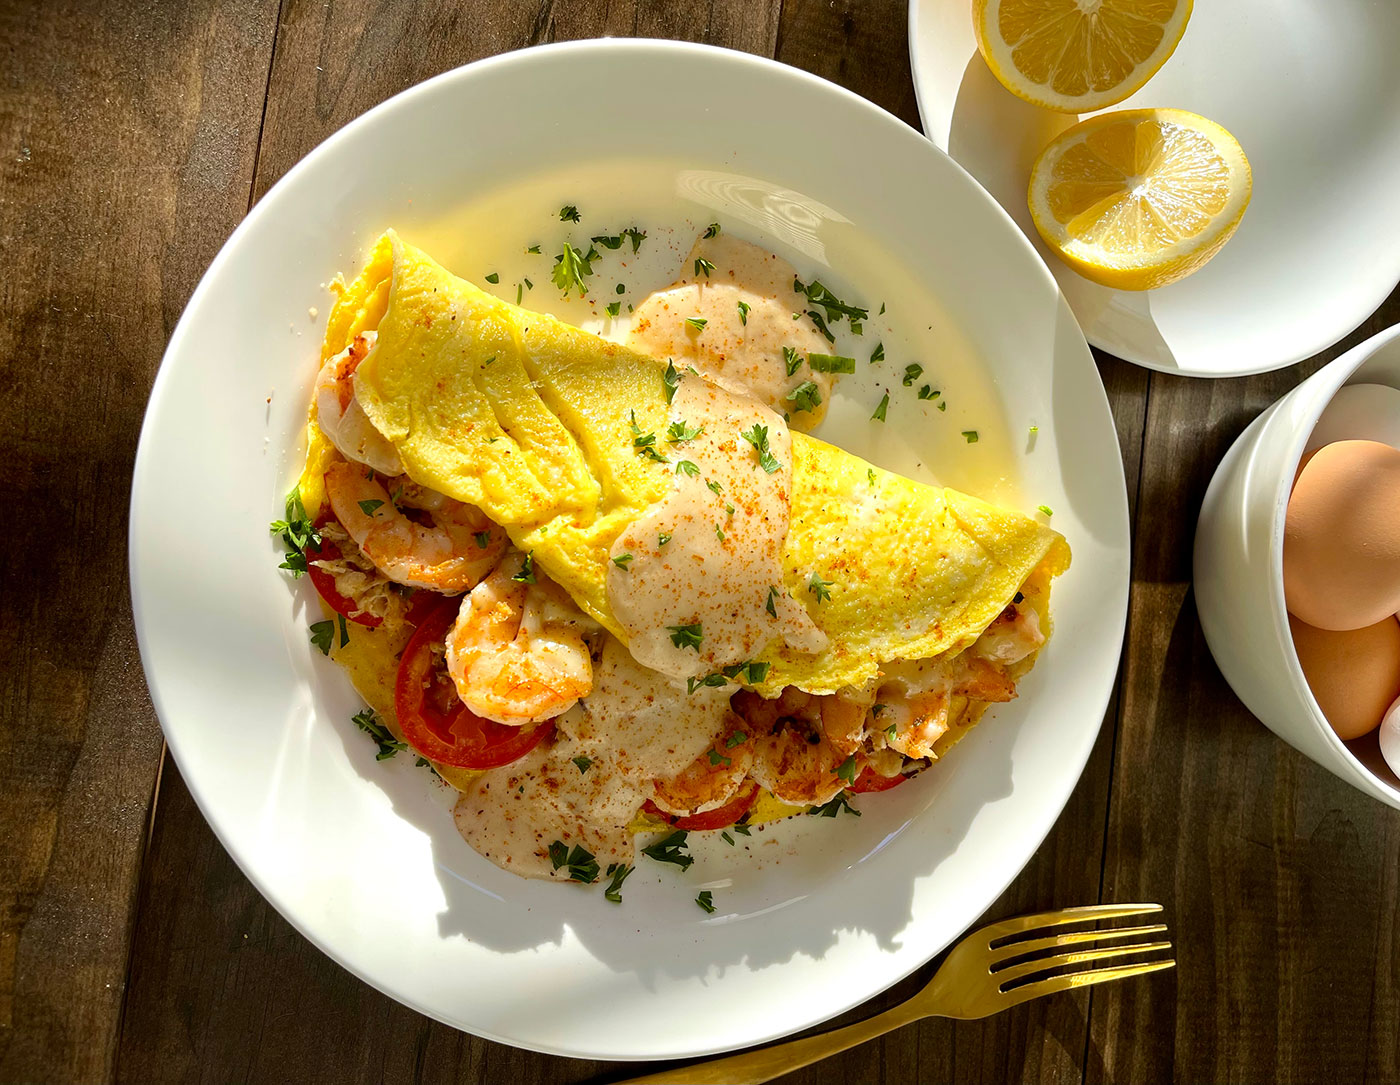 “By the Dock” Seafood Omelette